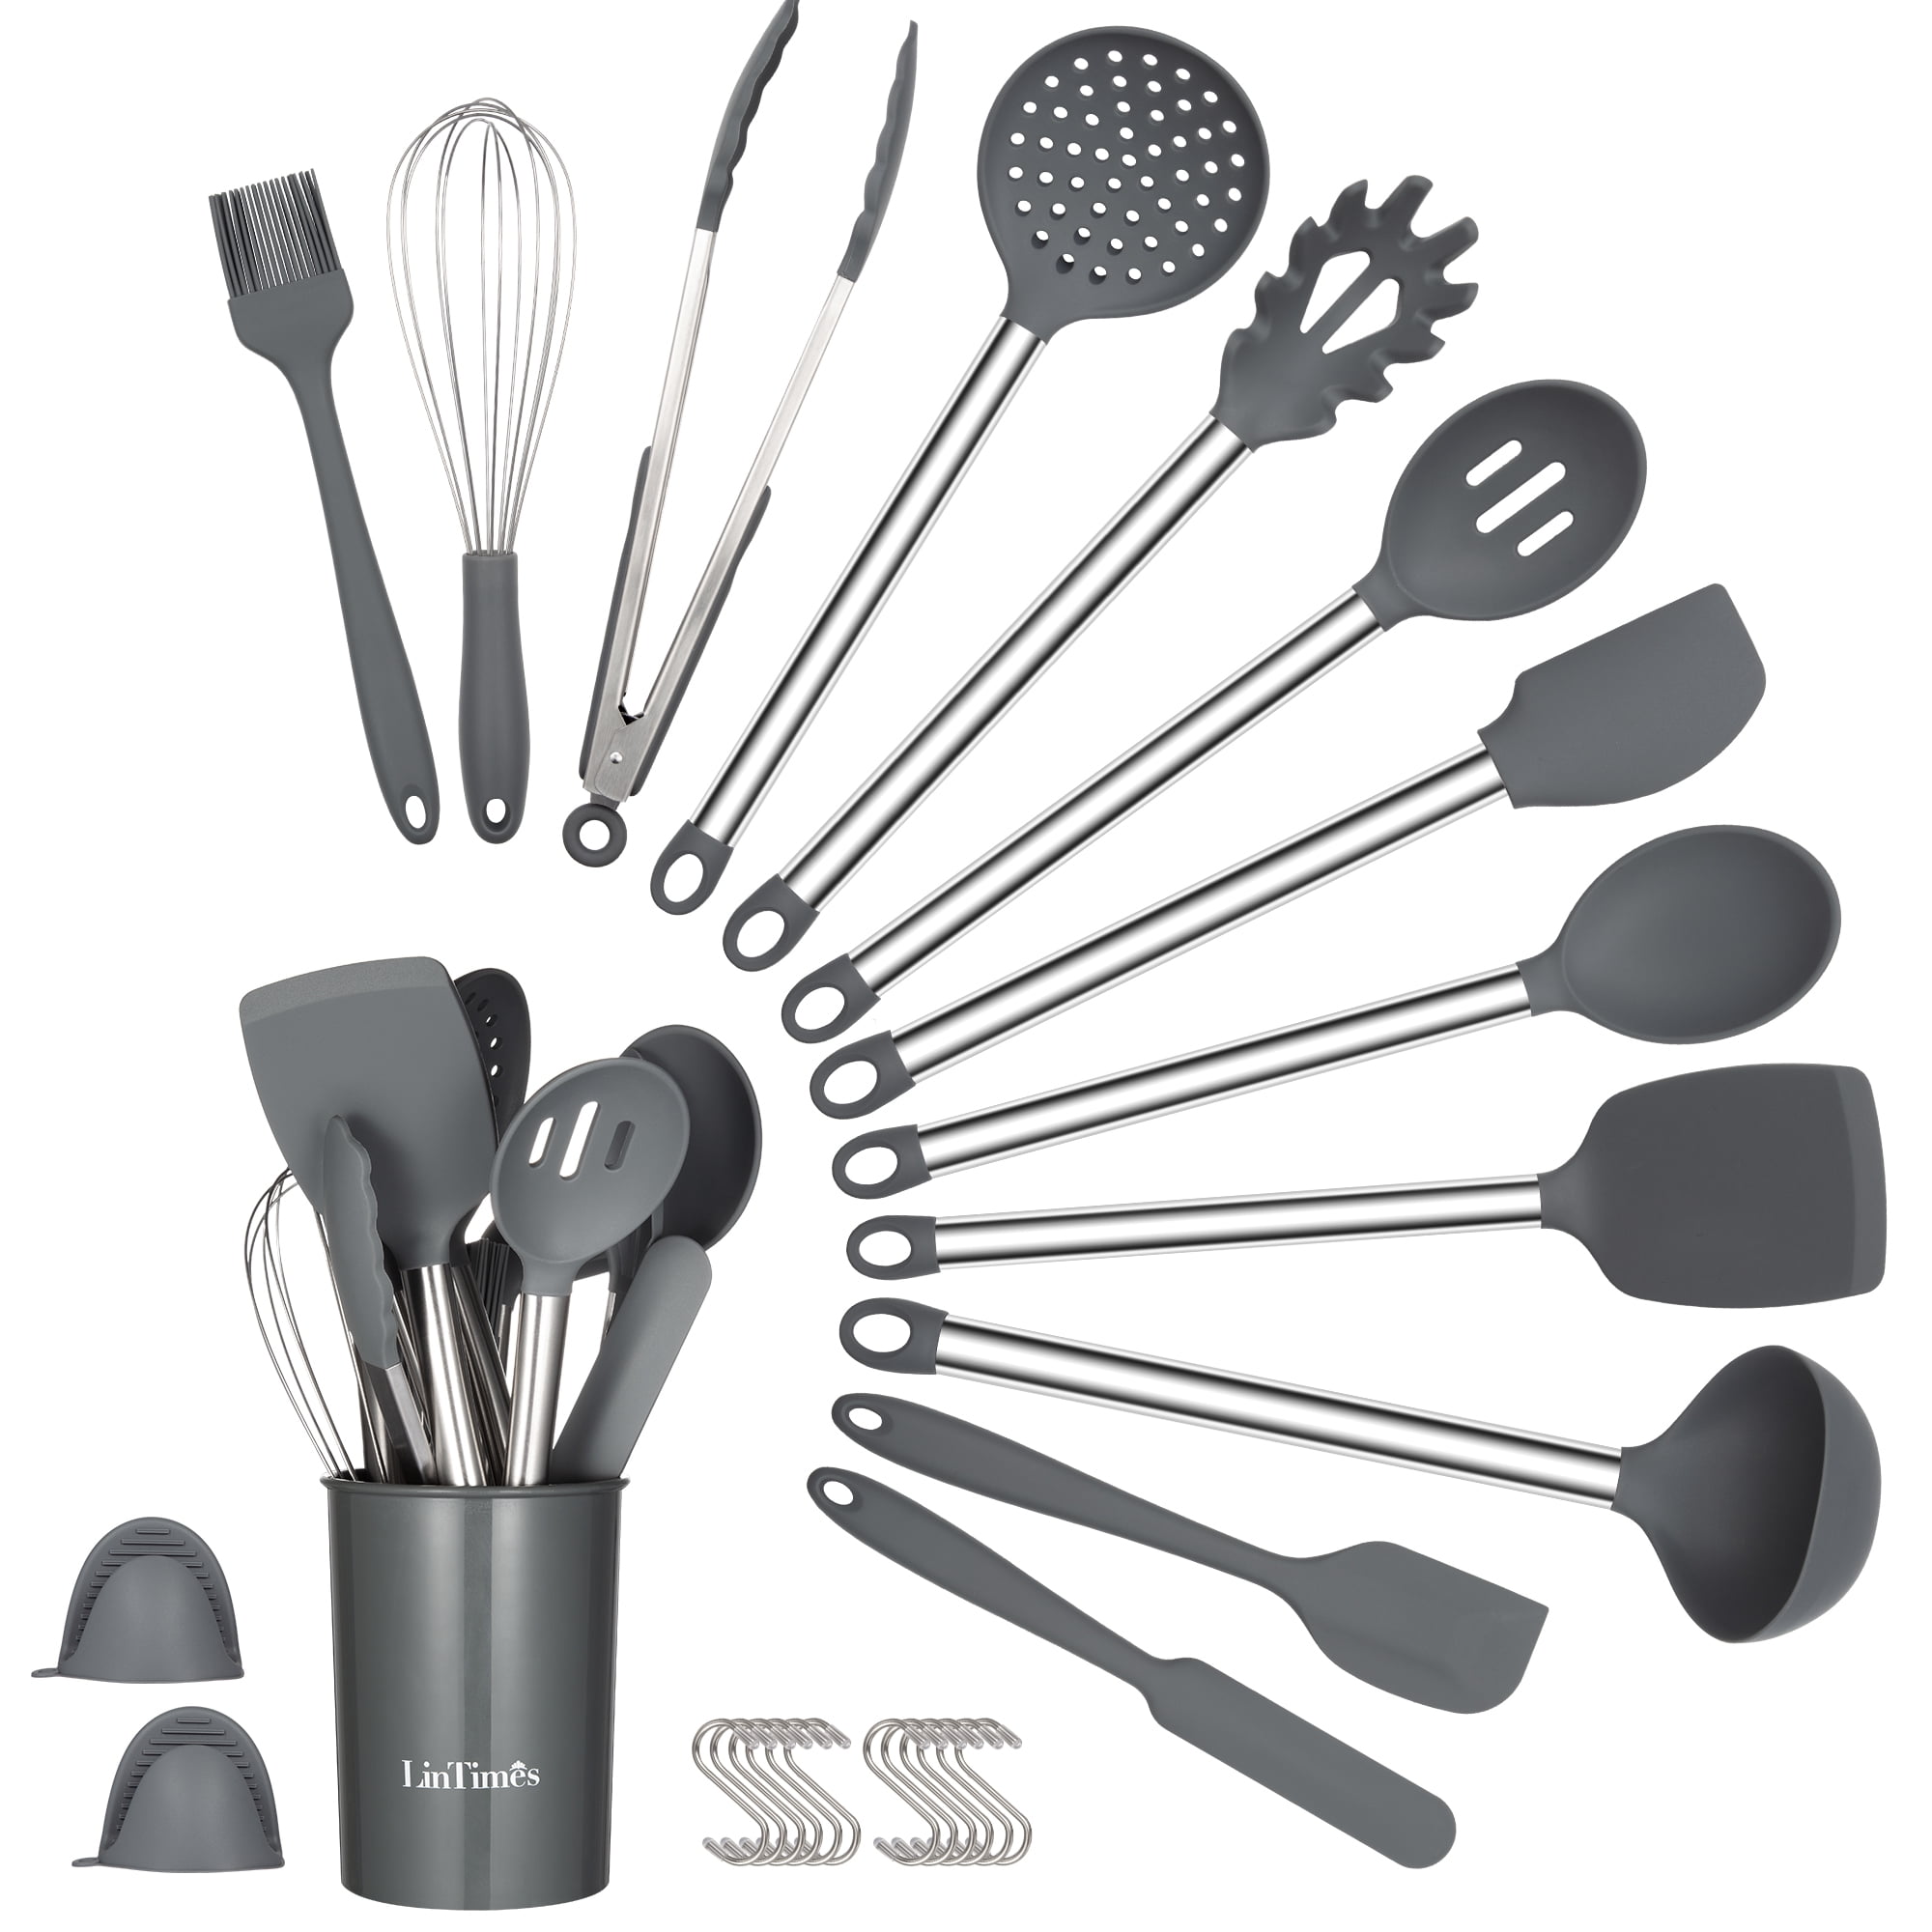 🧑🏻‍🍳This kitchenaid 4 piece silicone kitchen set is a must have